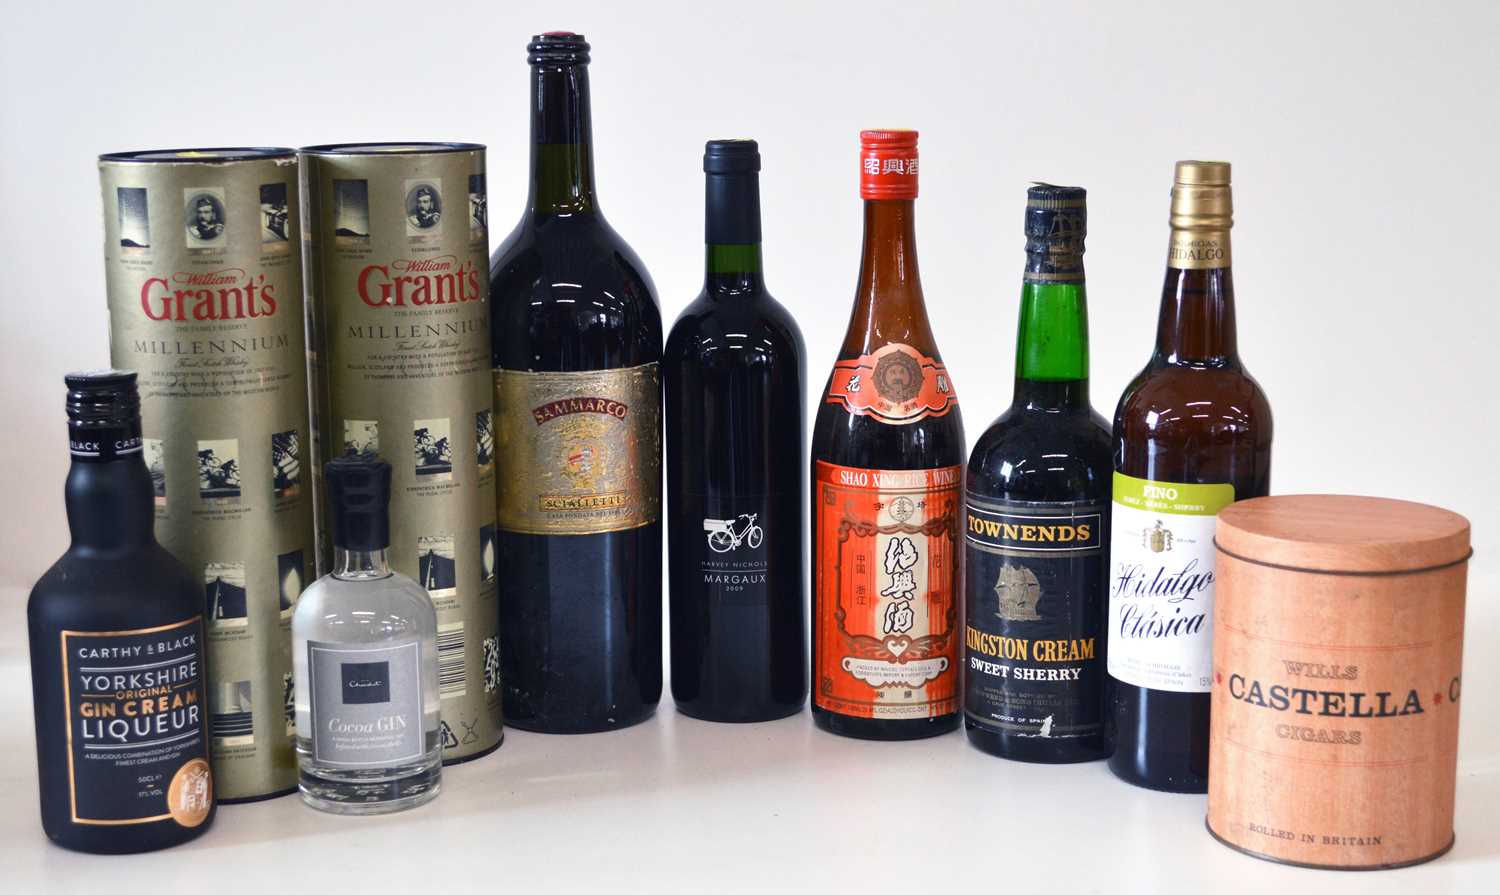 Lot 69 - 9 bottles Mixed Lot Fine Whisky, Margaux 2009, Sherries, Liqueurs and Cigars